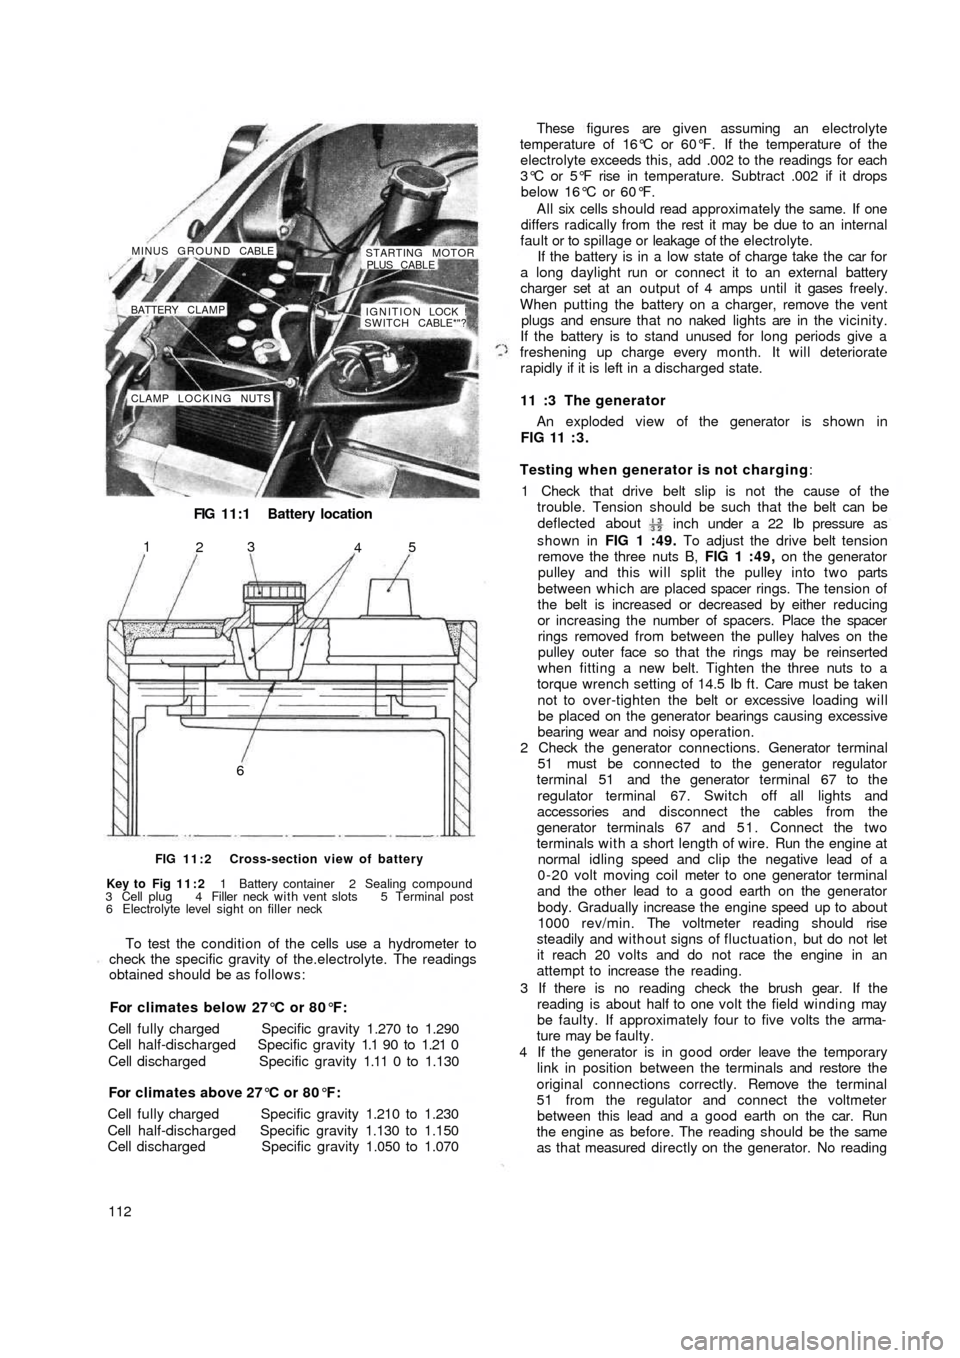 FIAT 500 1971 1.G Workshop Manual FIG 11:1 Battery location
CLAMP LOCKING NUTSIGNITION LOCK !
SWITCH CABLE*"? BATTERY CLAMP MINUS GROUND CABLE
STARTING MOTOR
PLUS CABLE
65
4 3
2 1
FIG 11:2 Cross-section view of battery
Key to  Fig  11